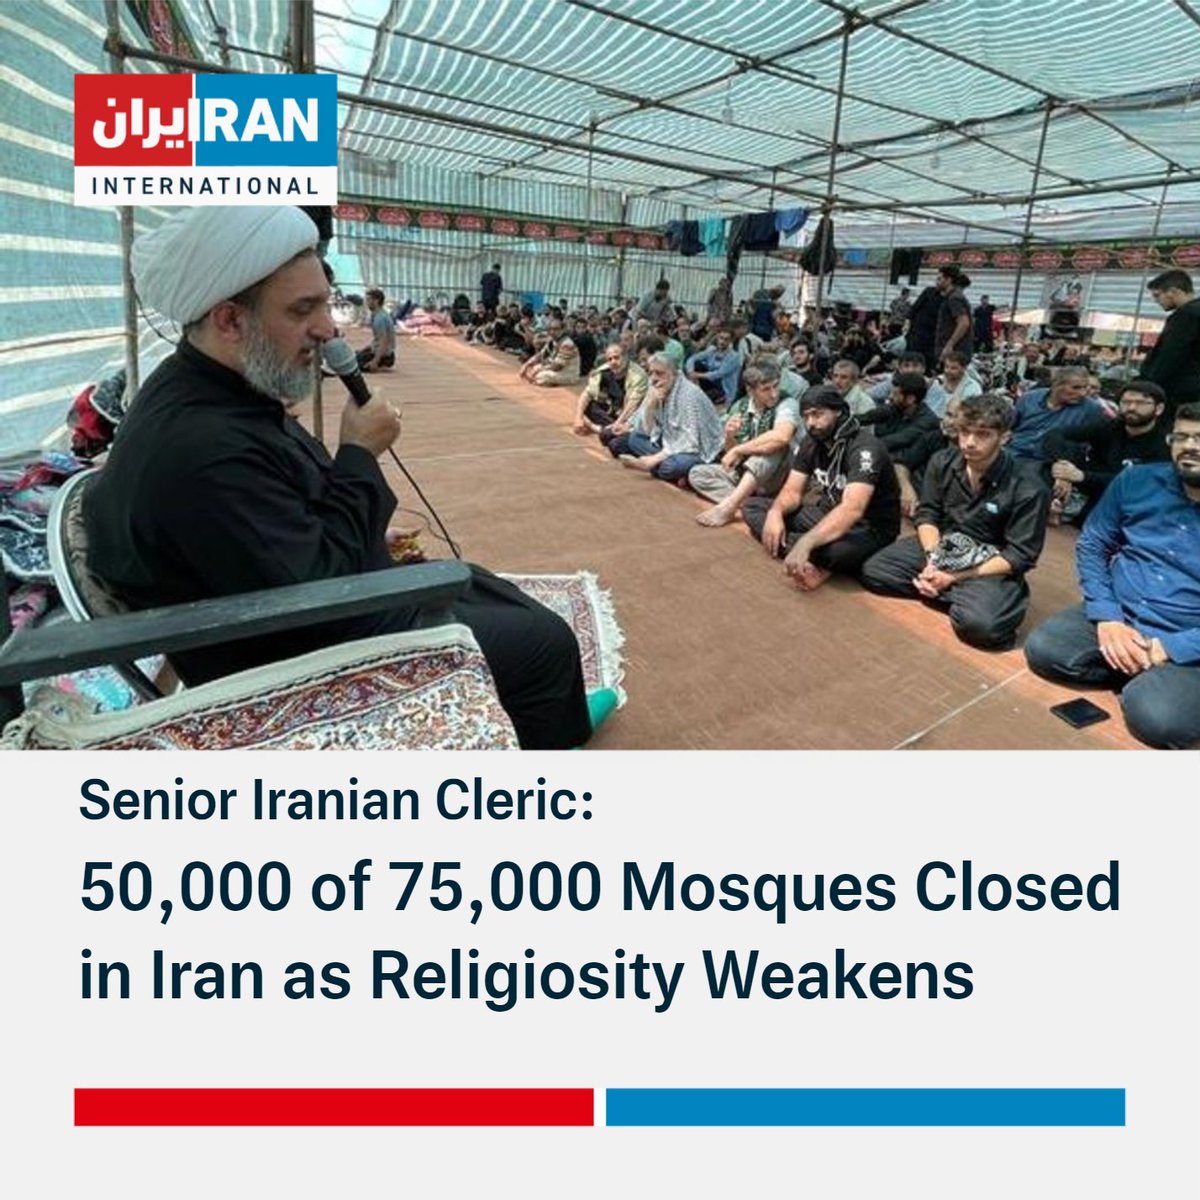 Senior Iranian cleric Mohammad Abolghassem Doulabi says around 50,000 of Iran's 75,000 mosques are closed, showing the declining numbers of Iranians attending and the weakening of religiosity in the Islamic Republic. iranintl.com/en/202306027255